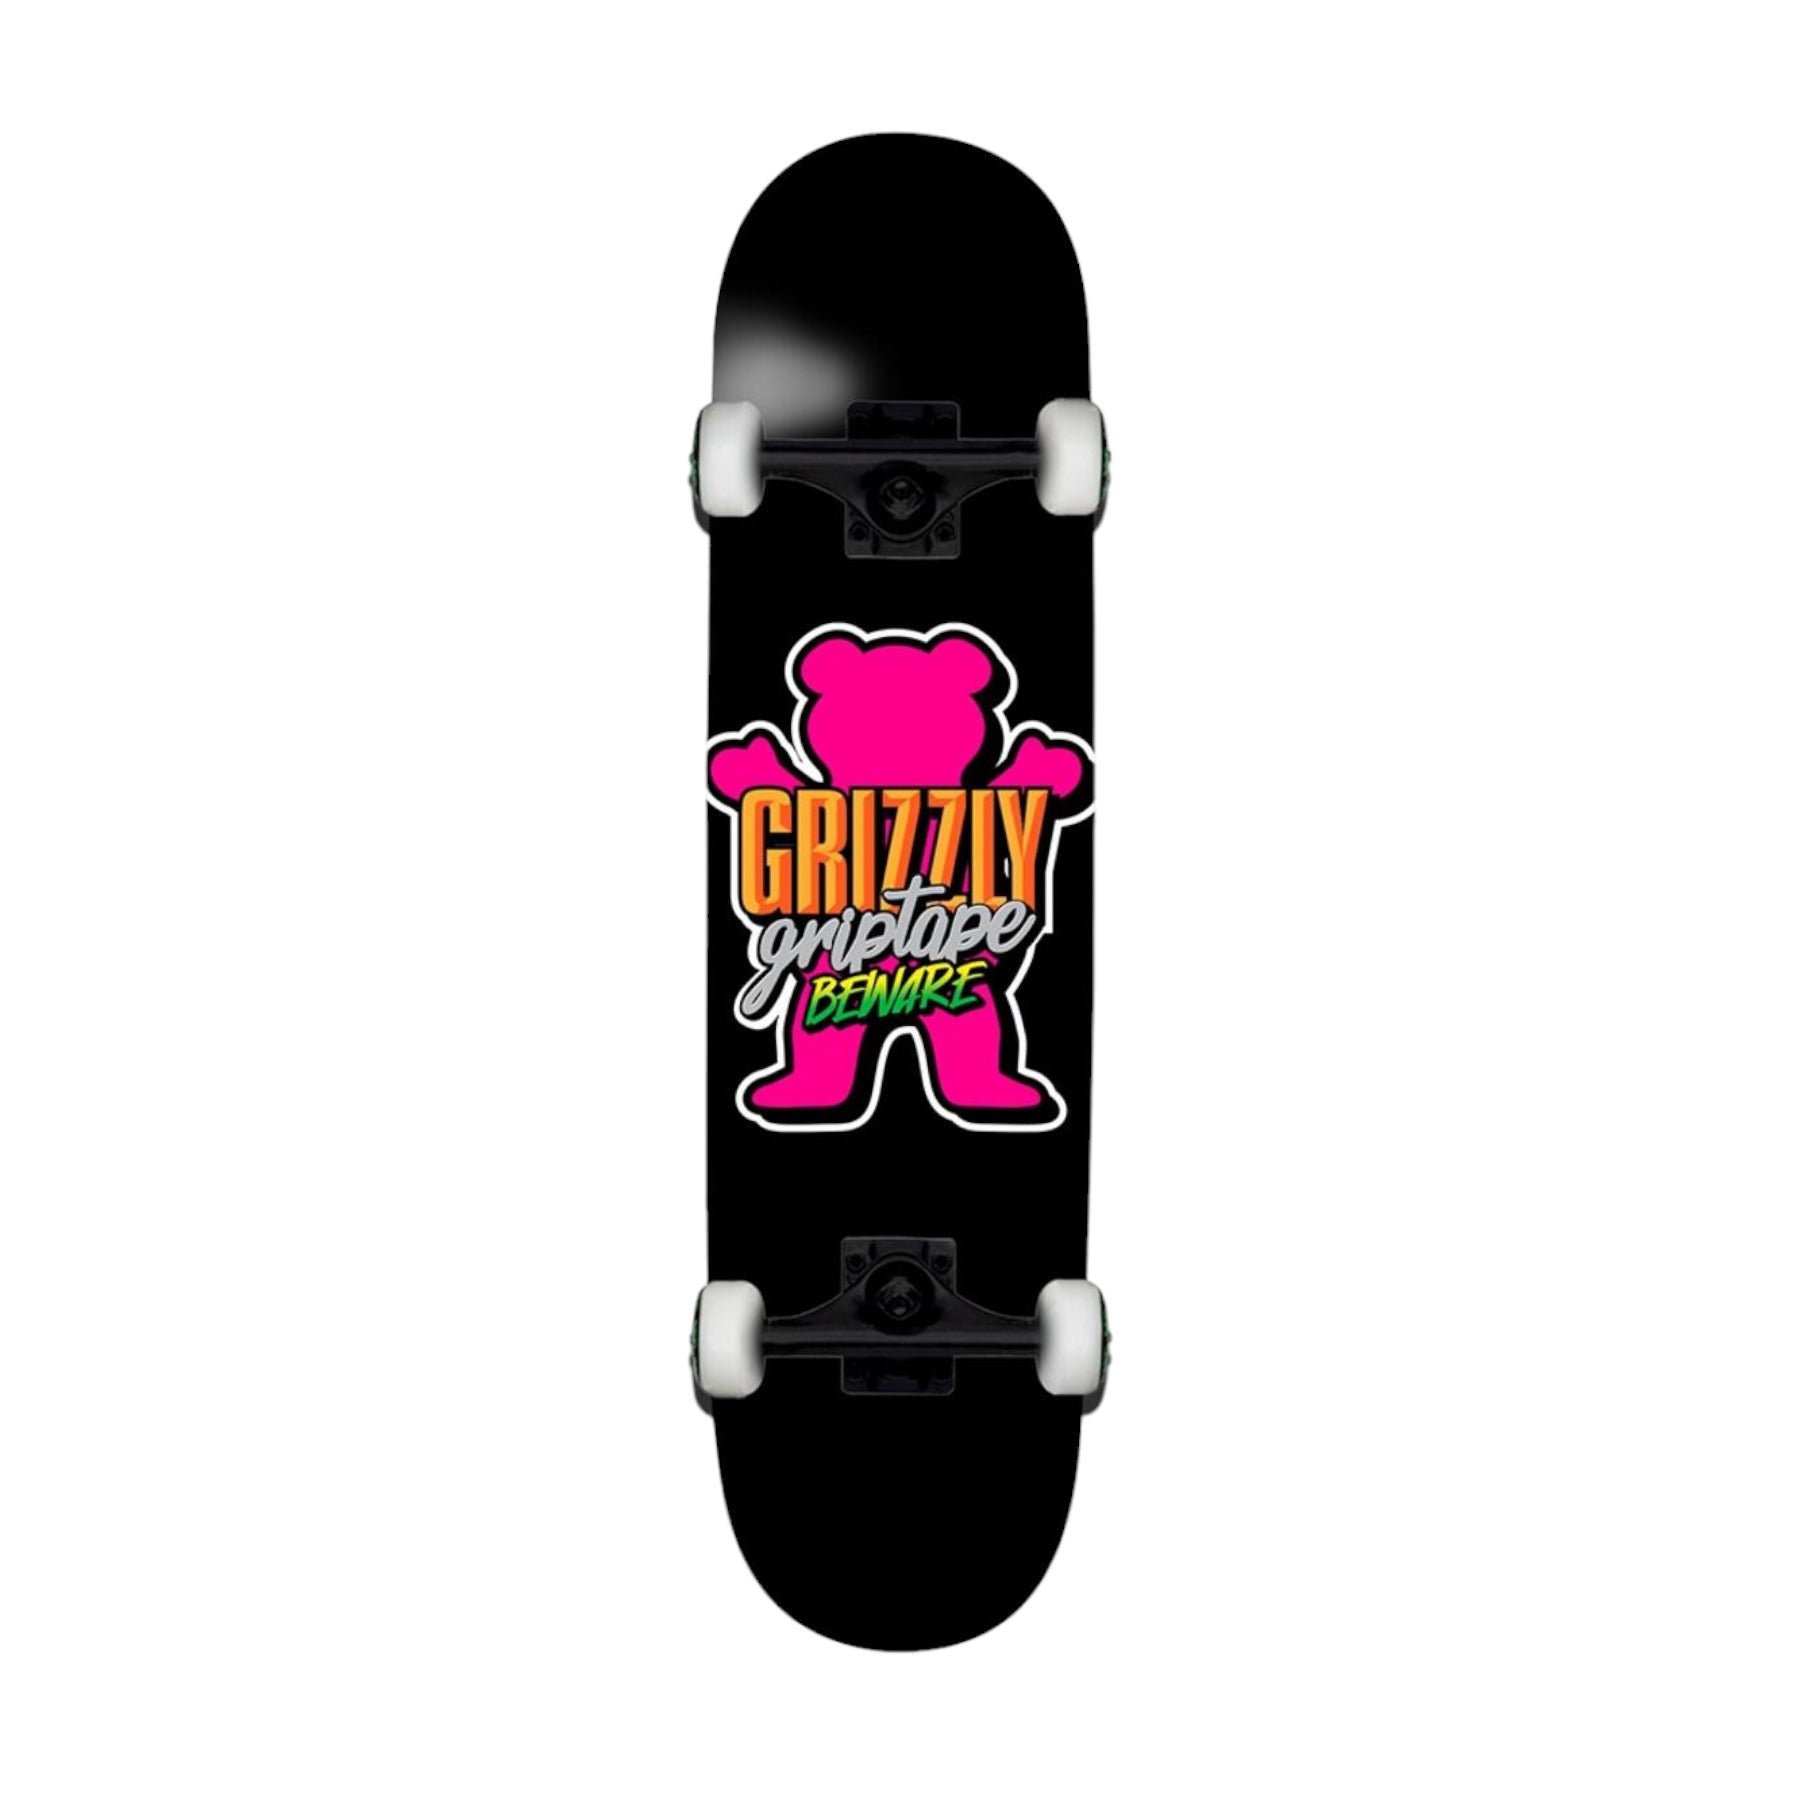 Grizzly Store Front Skateboard Complete